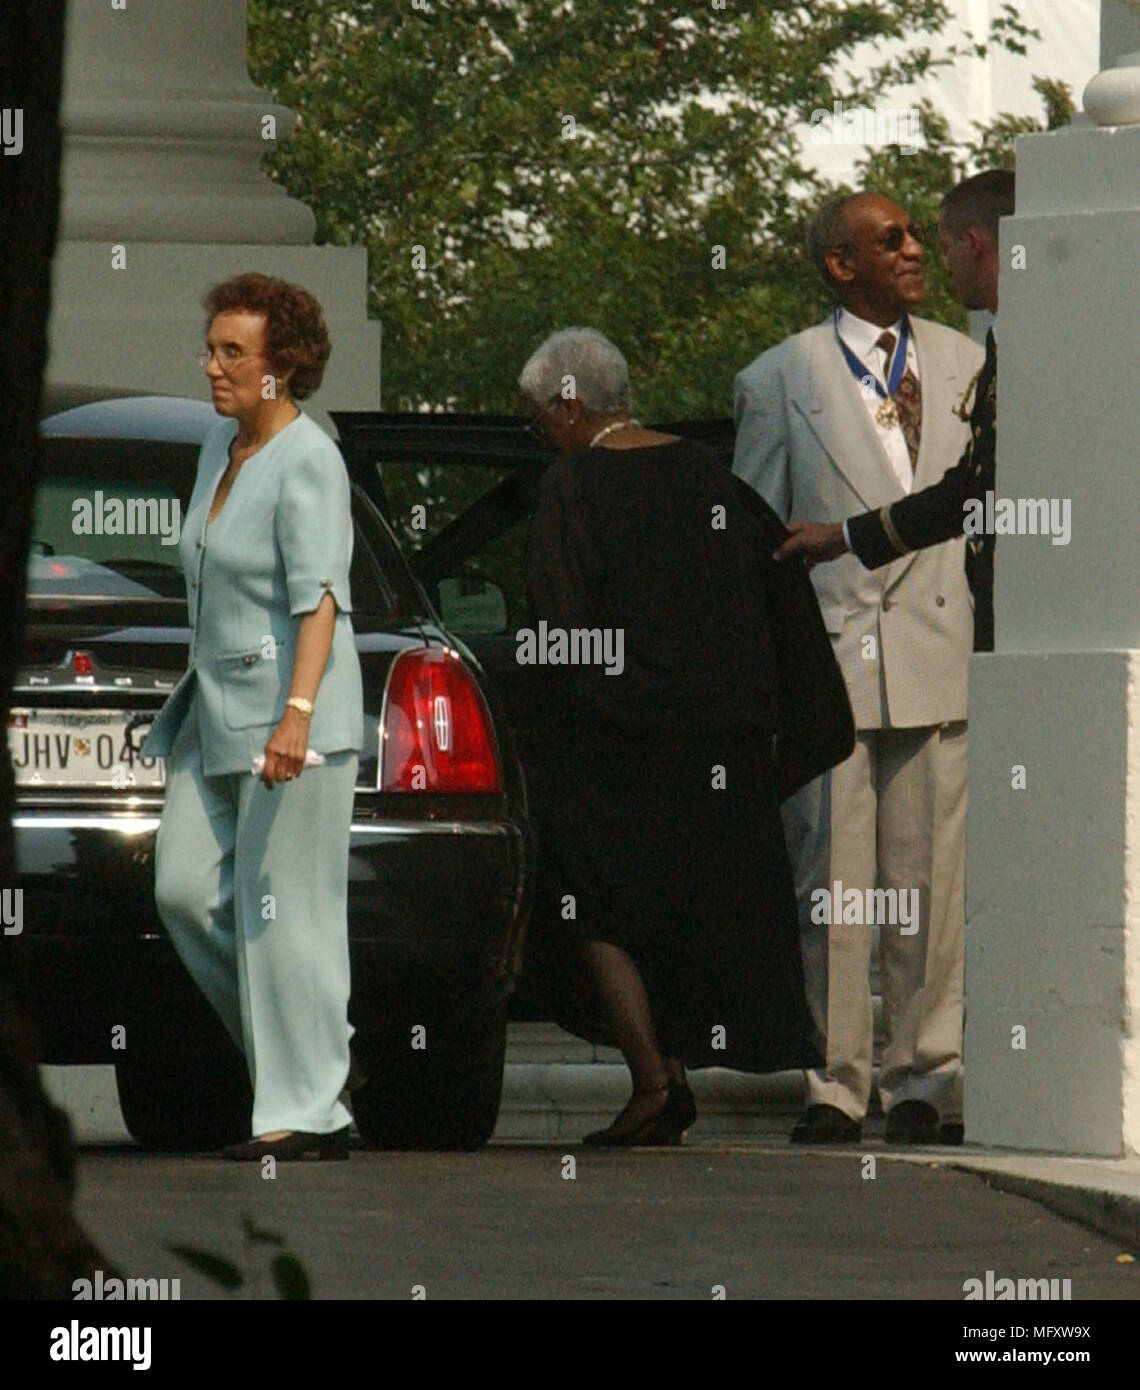 Bill Cosby departs the White House after receiving the Presidential Madal of Freedom from U.S. President George W. Bush during a ceremony in the East Room of the White House in Washington, DC on July 9, 2002.Credit: Ron Sachs/CNP /MediaPunch Stock Photo